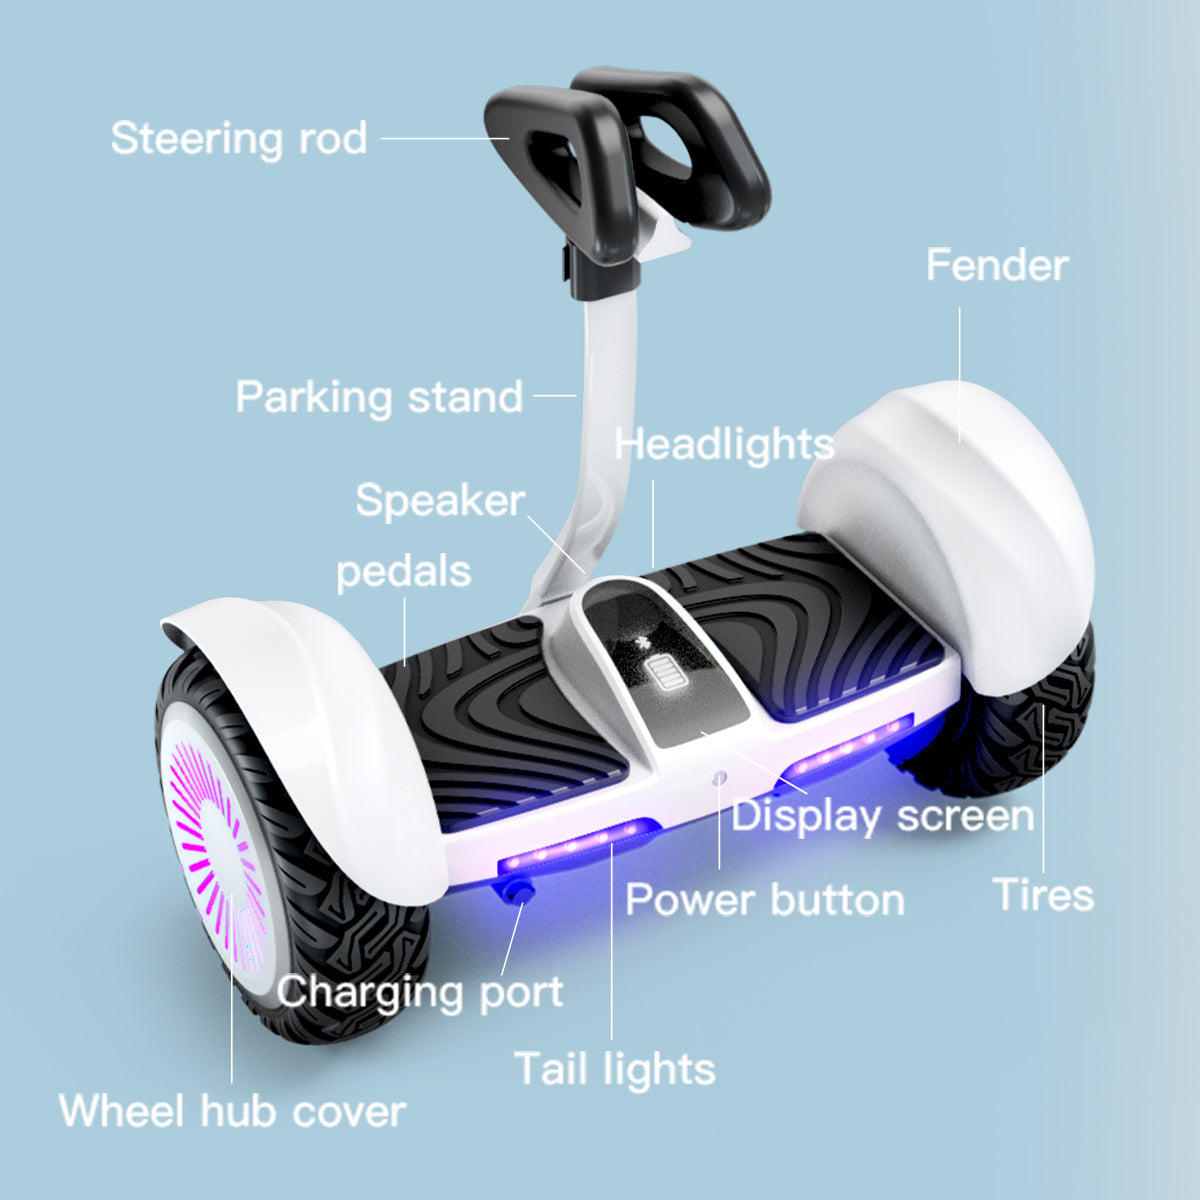 Raee IE-K8 Electric Scooter 10 Inches Tire 700W Battery 36V 4AH Electric Self-Balancing scooter 80KG Load